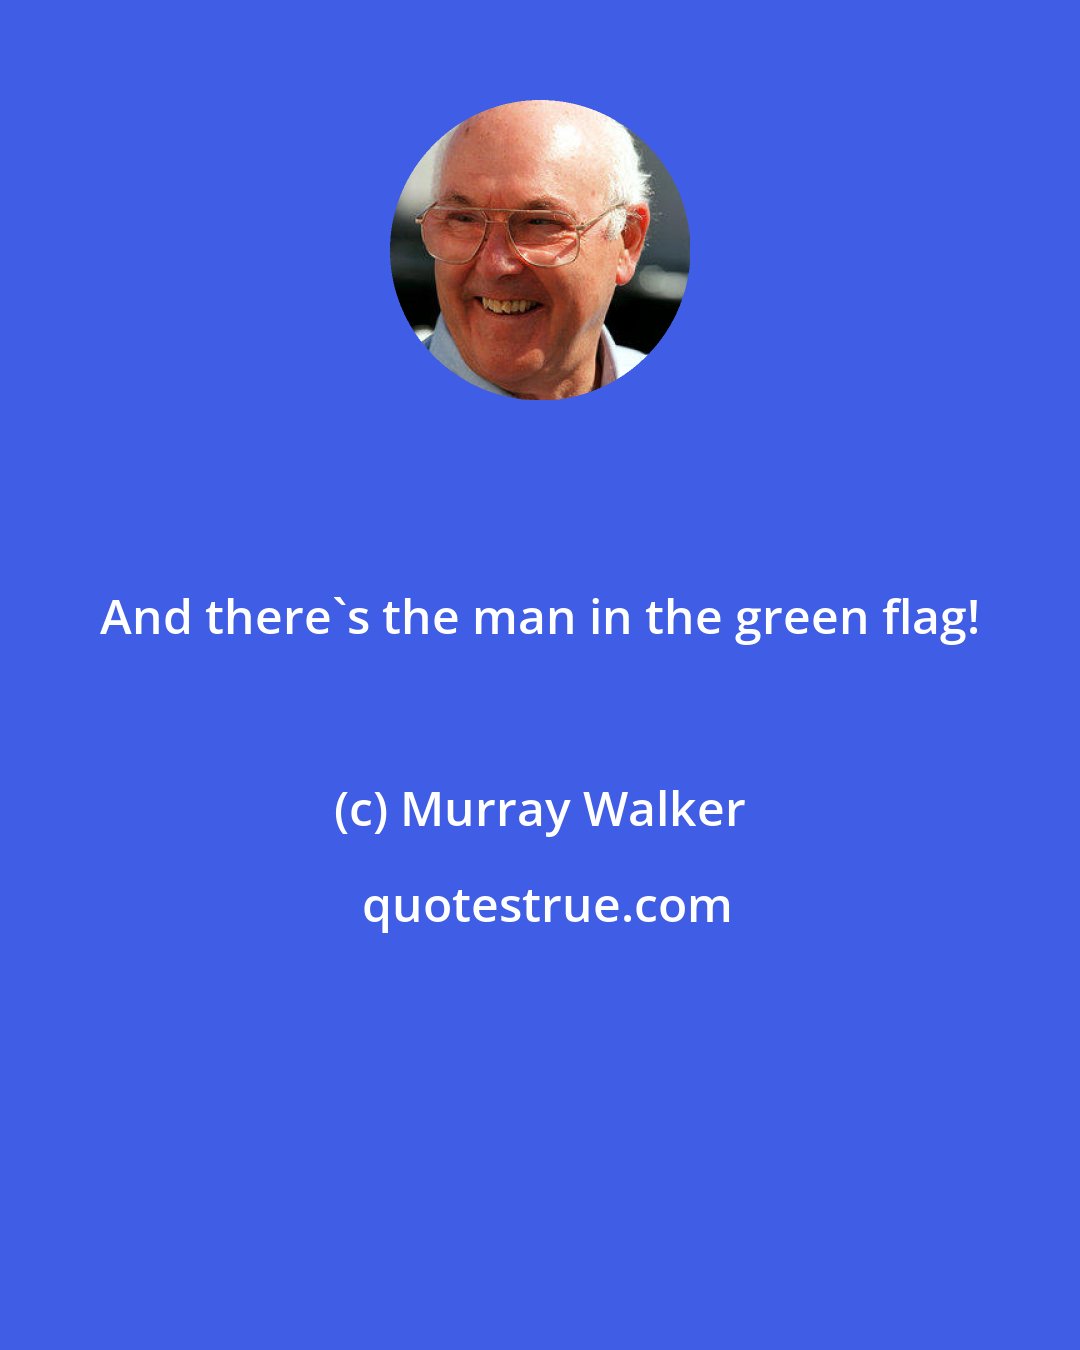 Murray Walker: And there's the man in the green flag!